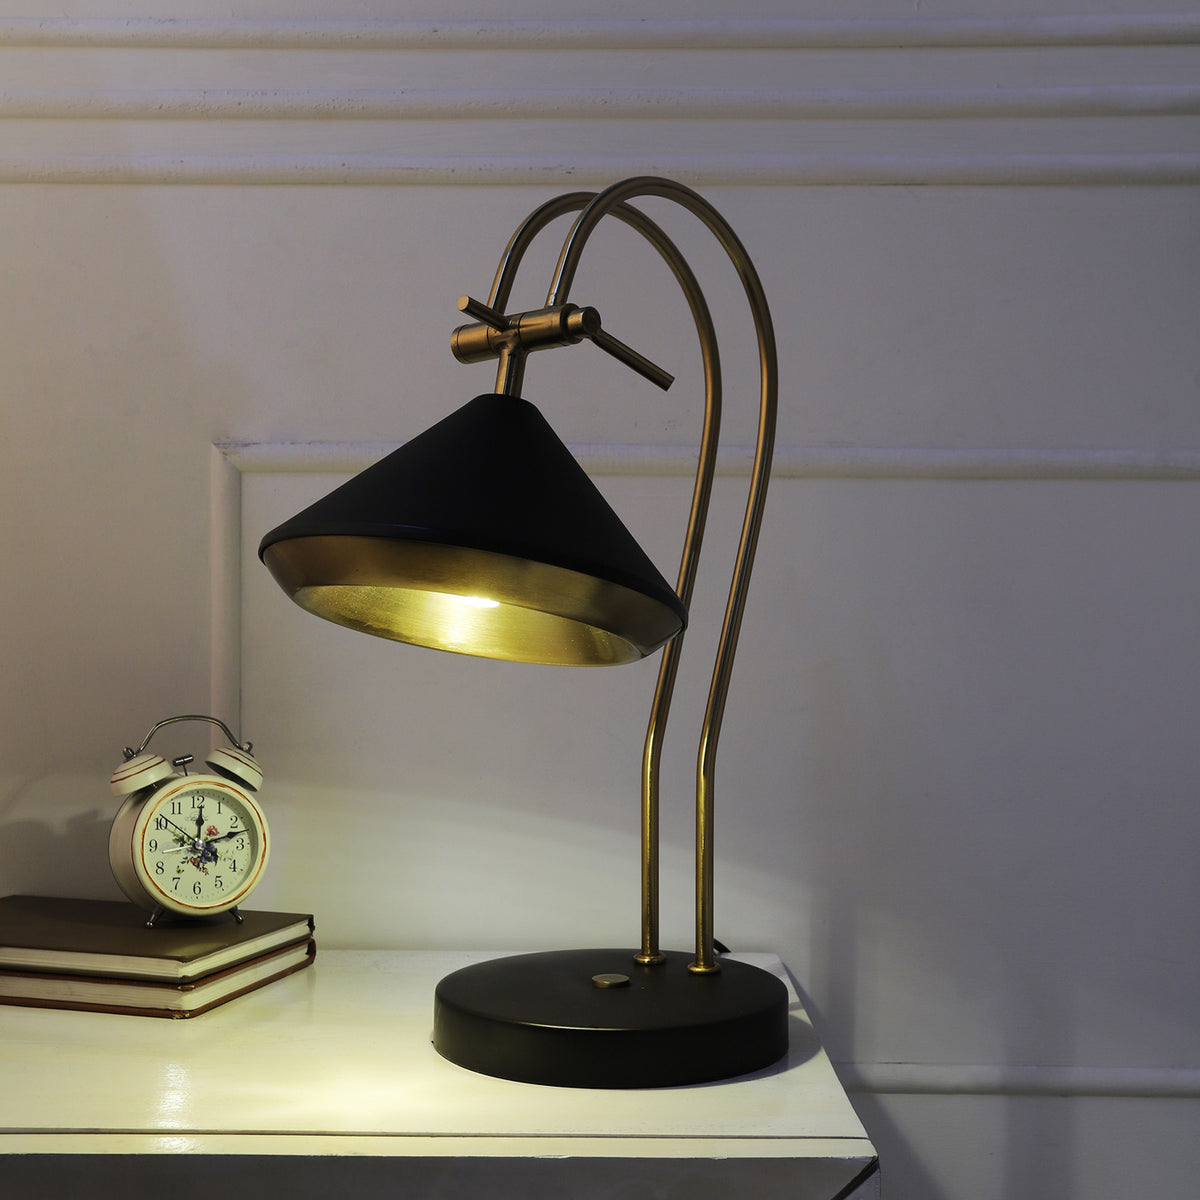 The "Shelby" Adjustable Table lamp in Black and Gold Finish